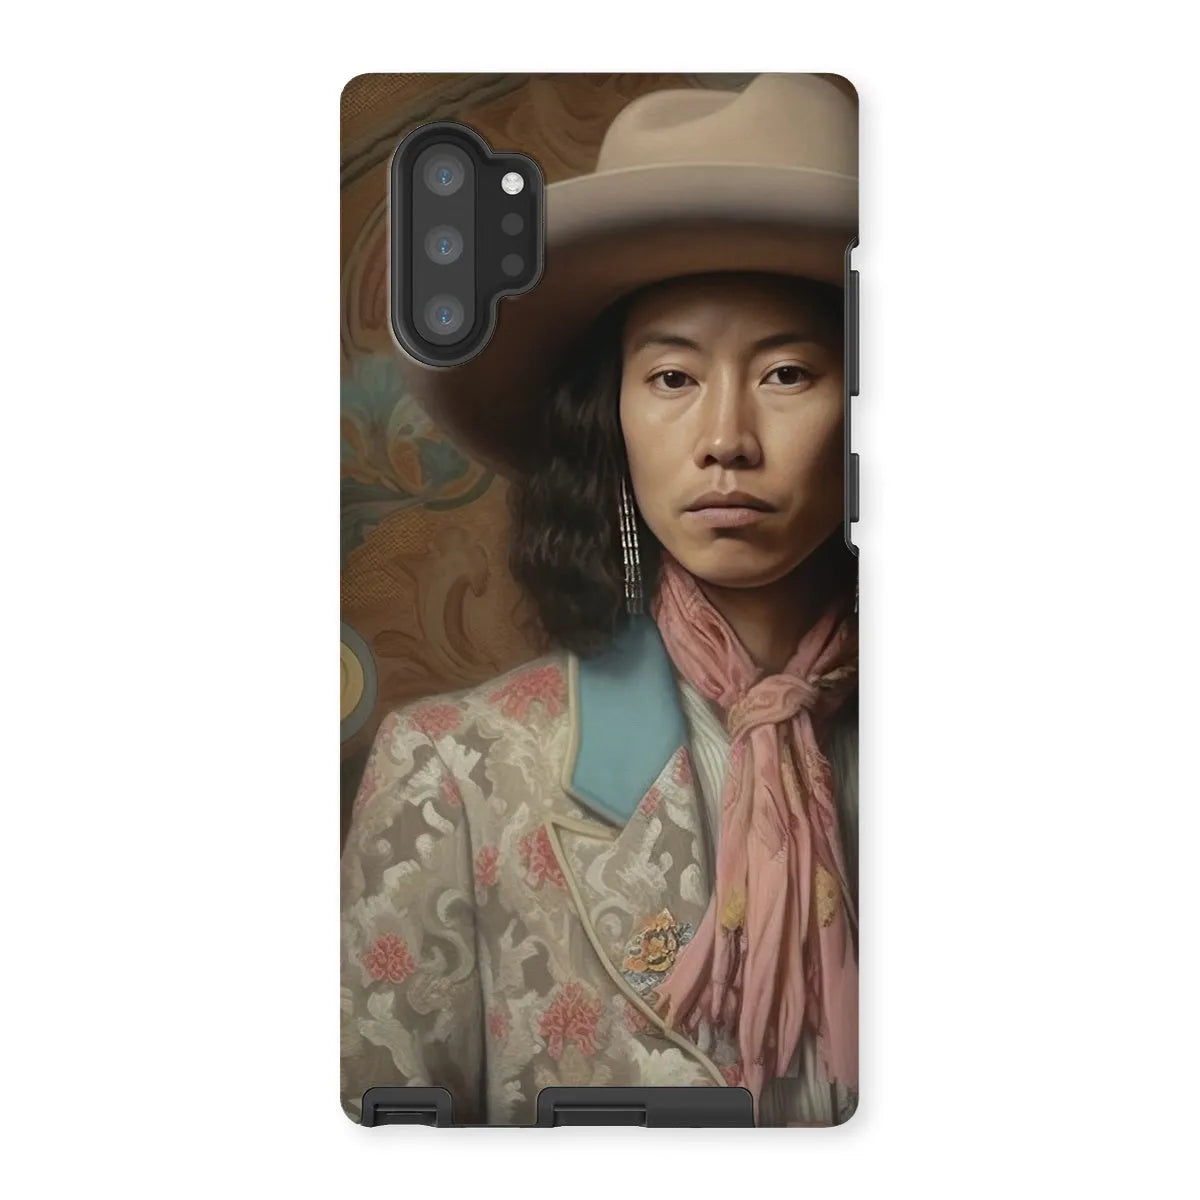 Dorjee The Gay Cowboy - Dandy Gay Aesthetic Art Phone Case - Samsung Galaxy Note 10p / Matte - Mobile Phone Cases